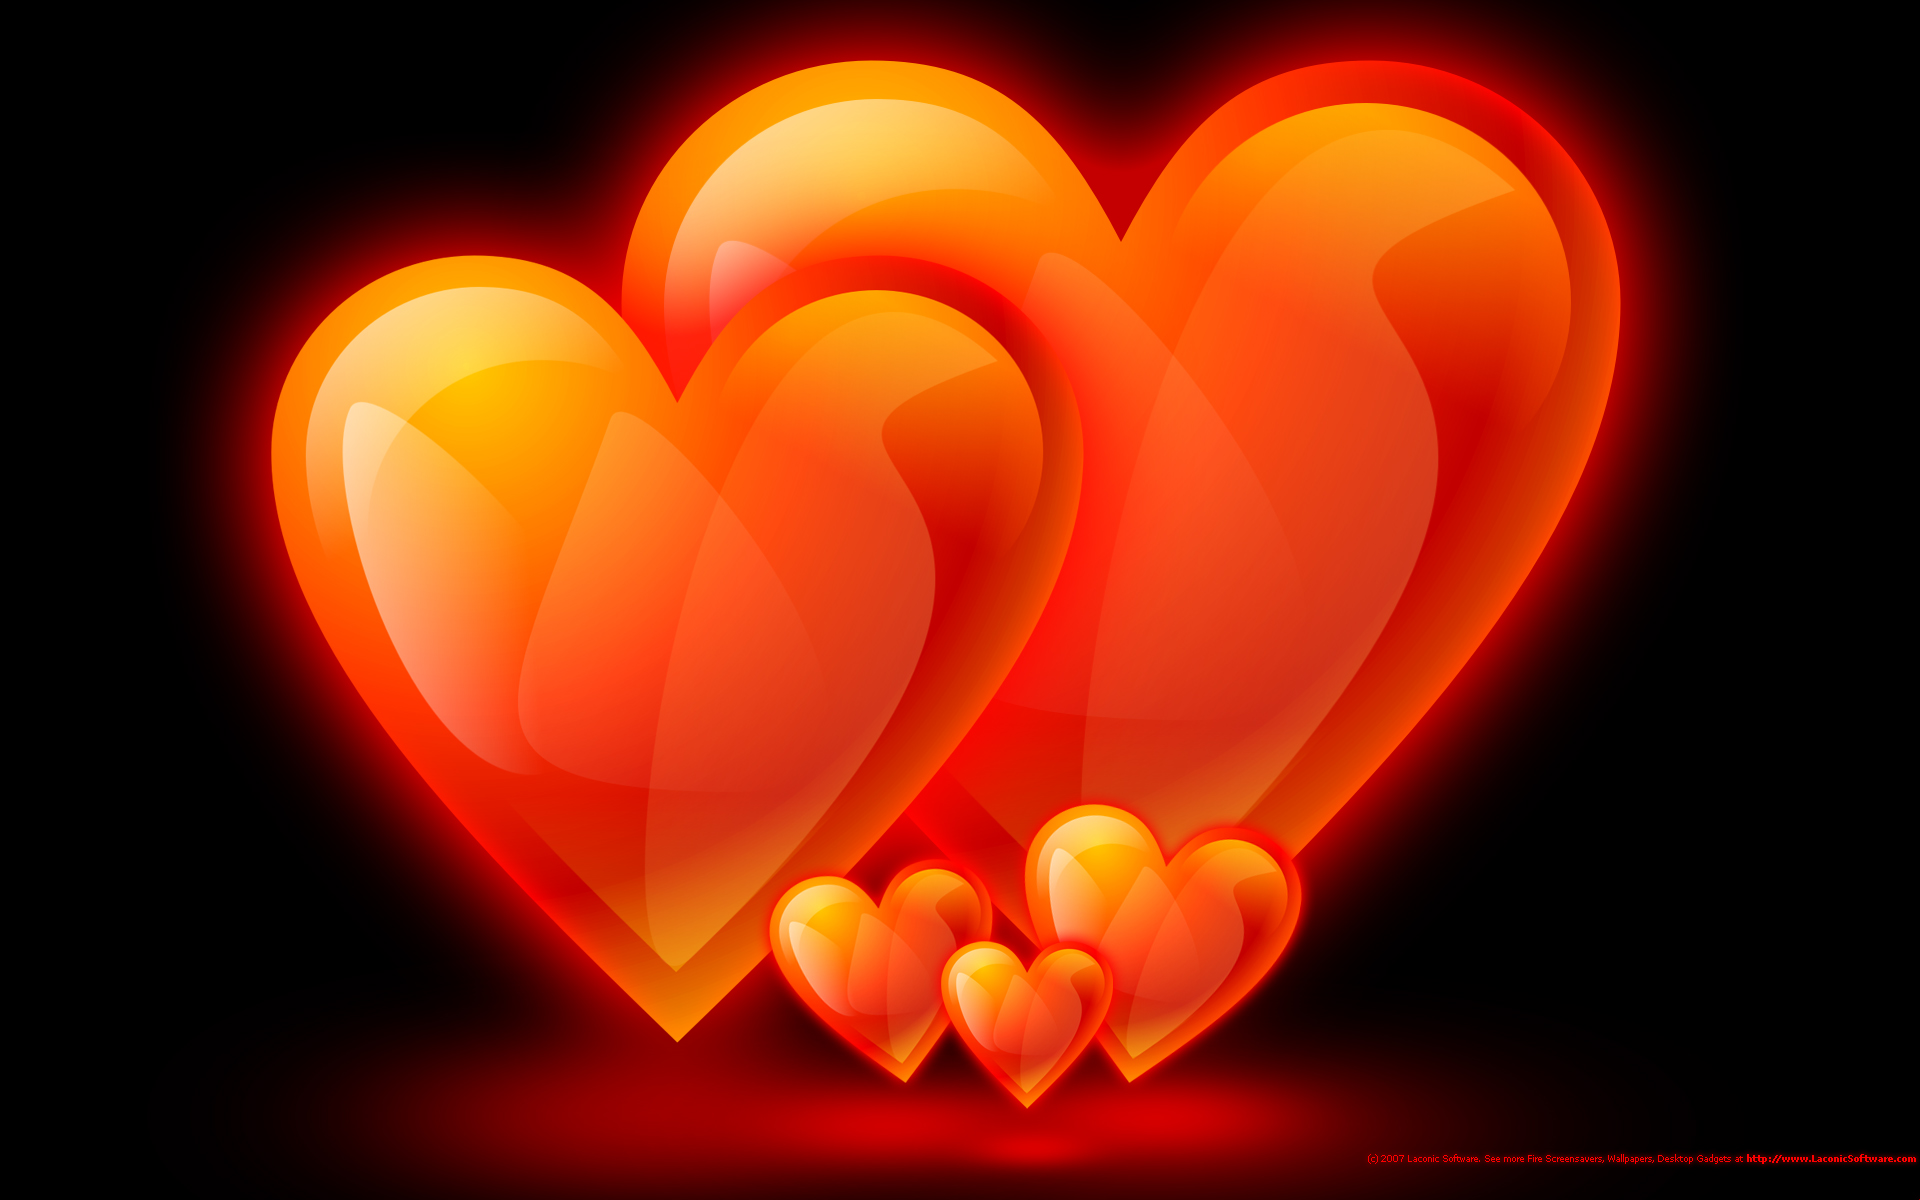 Flame Wallpaper Hearts Family Screensavers Background